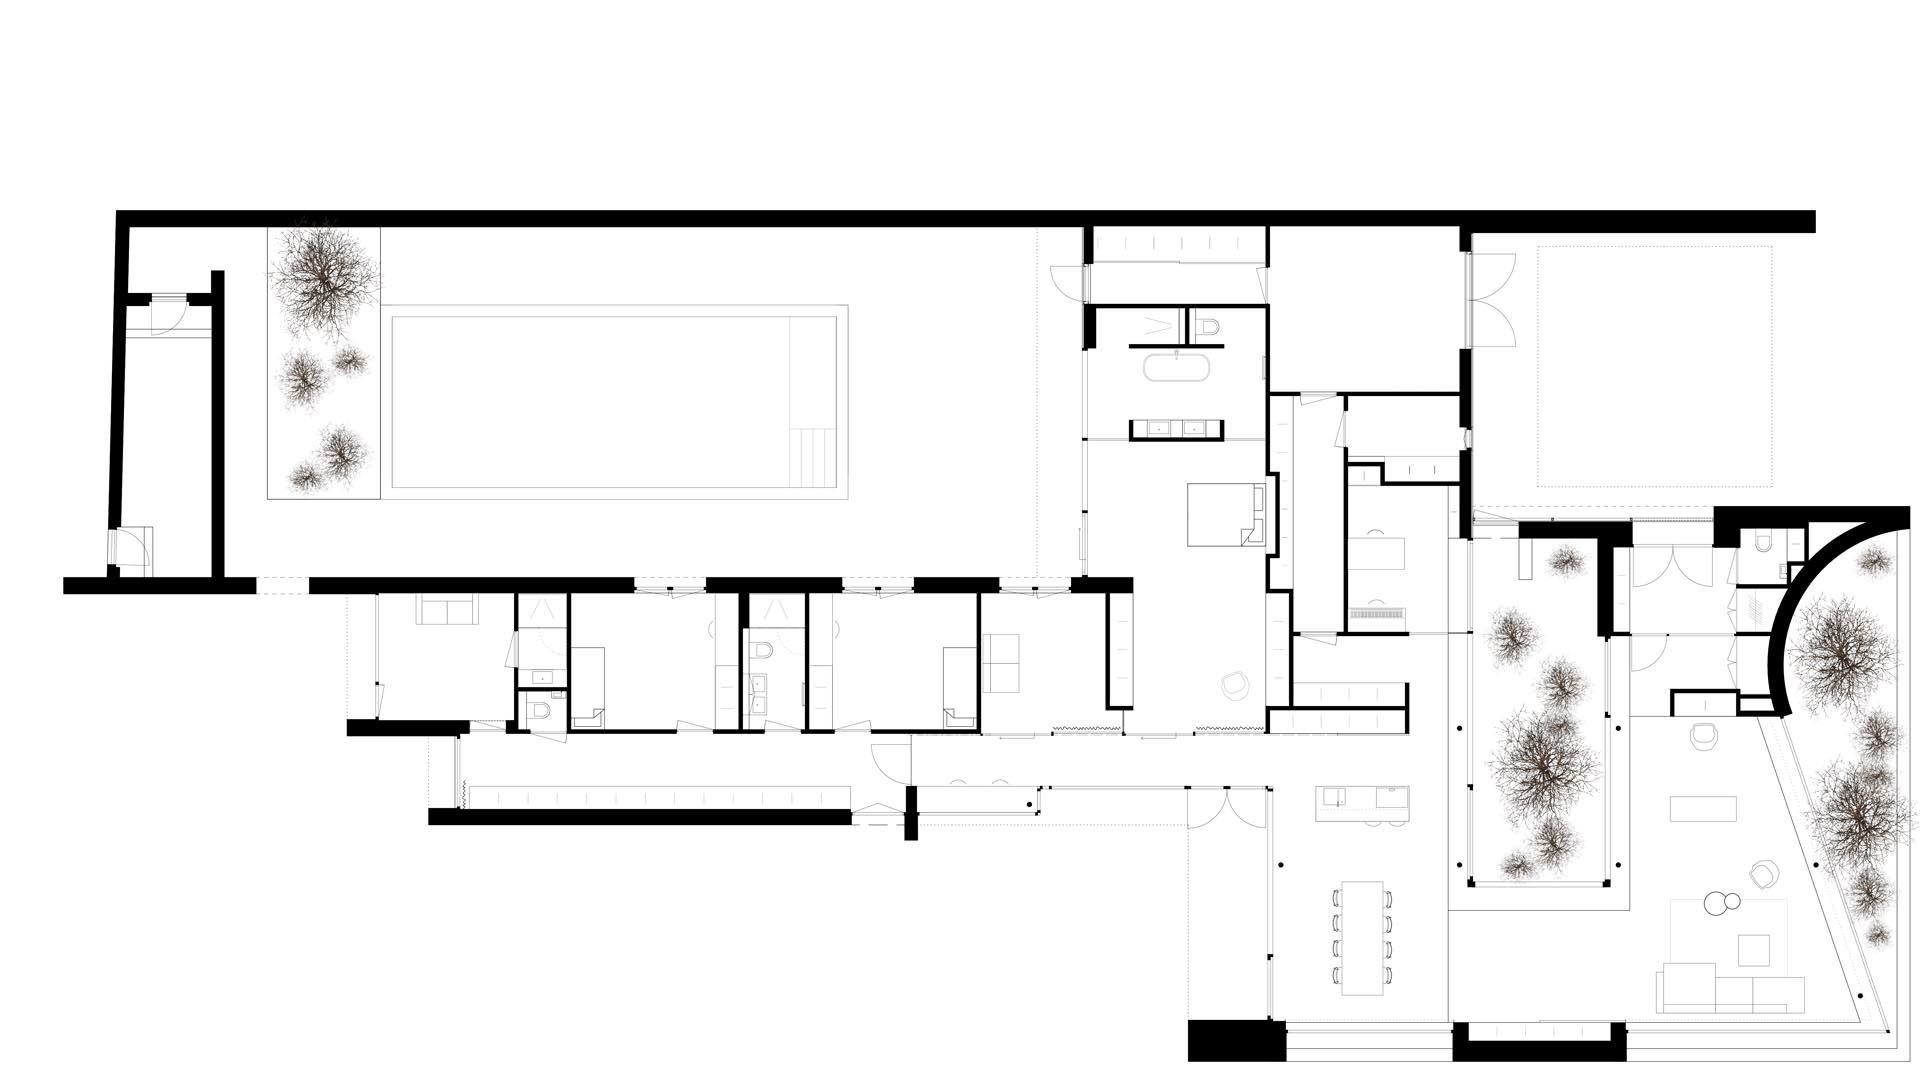 The floor plan of a modern single level home with a swimming pool.